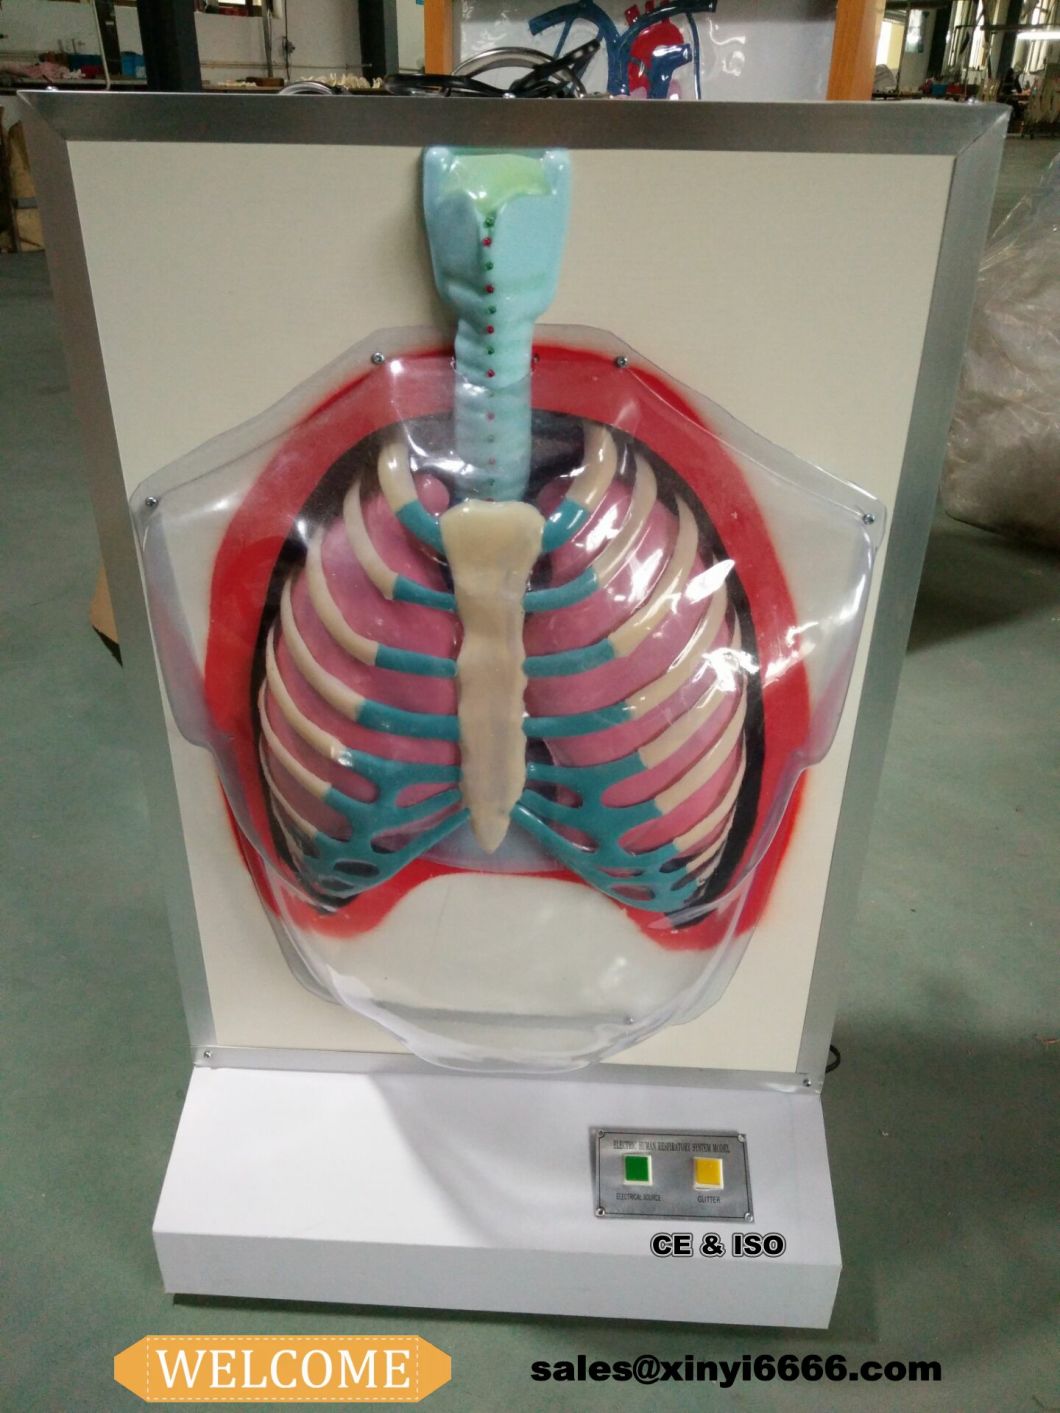 High Electric Human Respiratory System Model for Medical Teaching. (anatomical model)